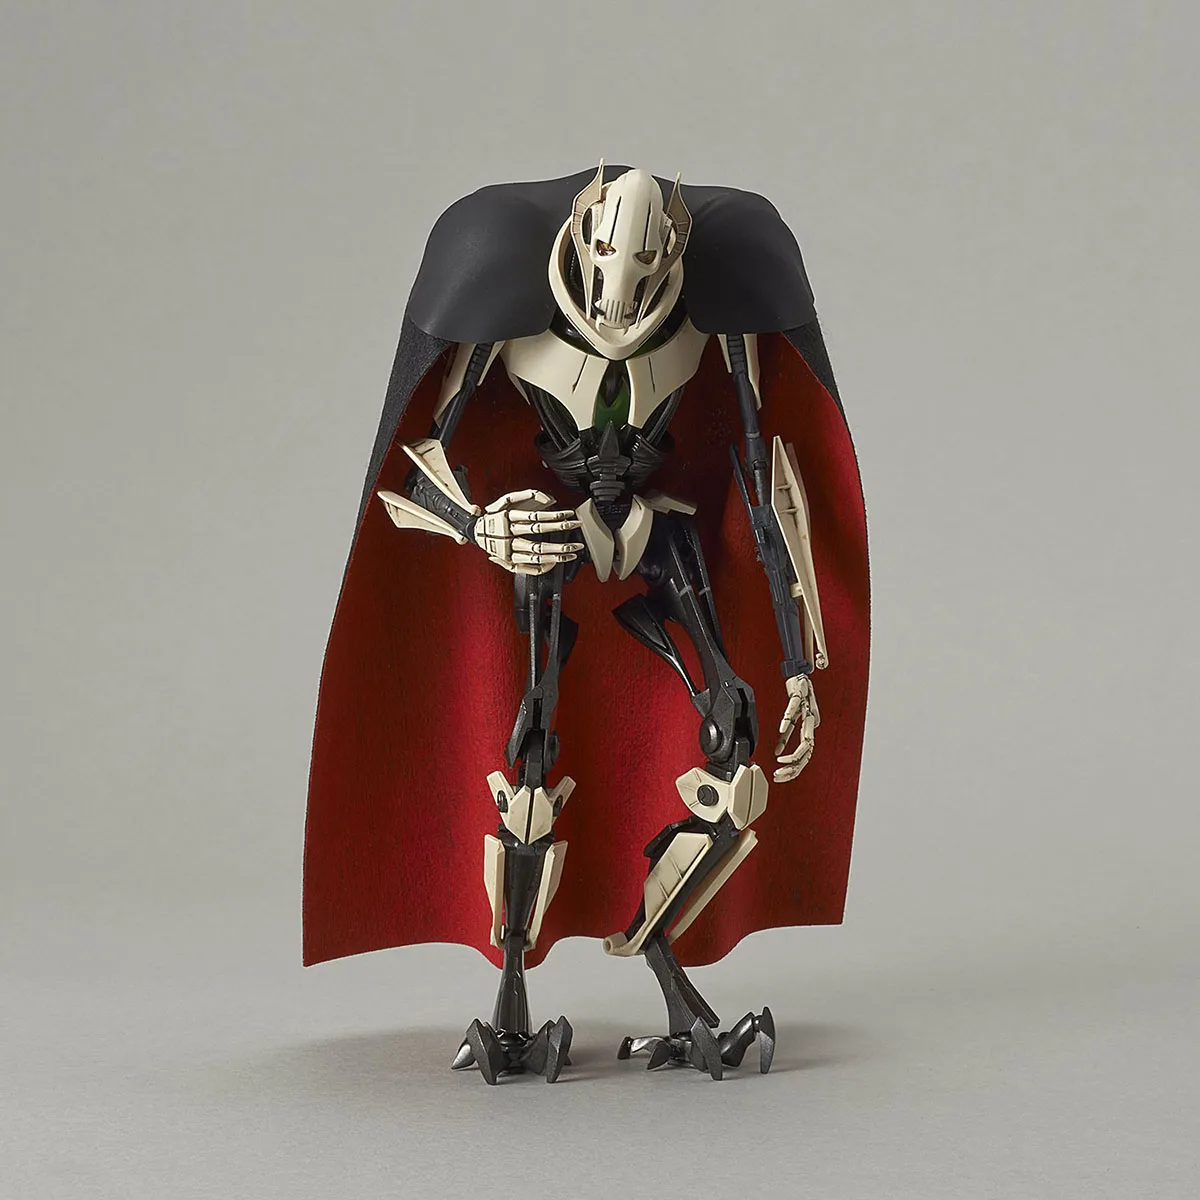 Bandai Hobby Star Wars 1/12 Scale Plastic Model General Grievous Premium Collectible Action Assembly Figure Toy Gift for Kids images - 6